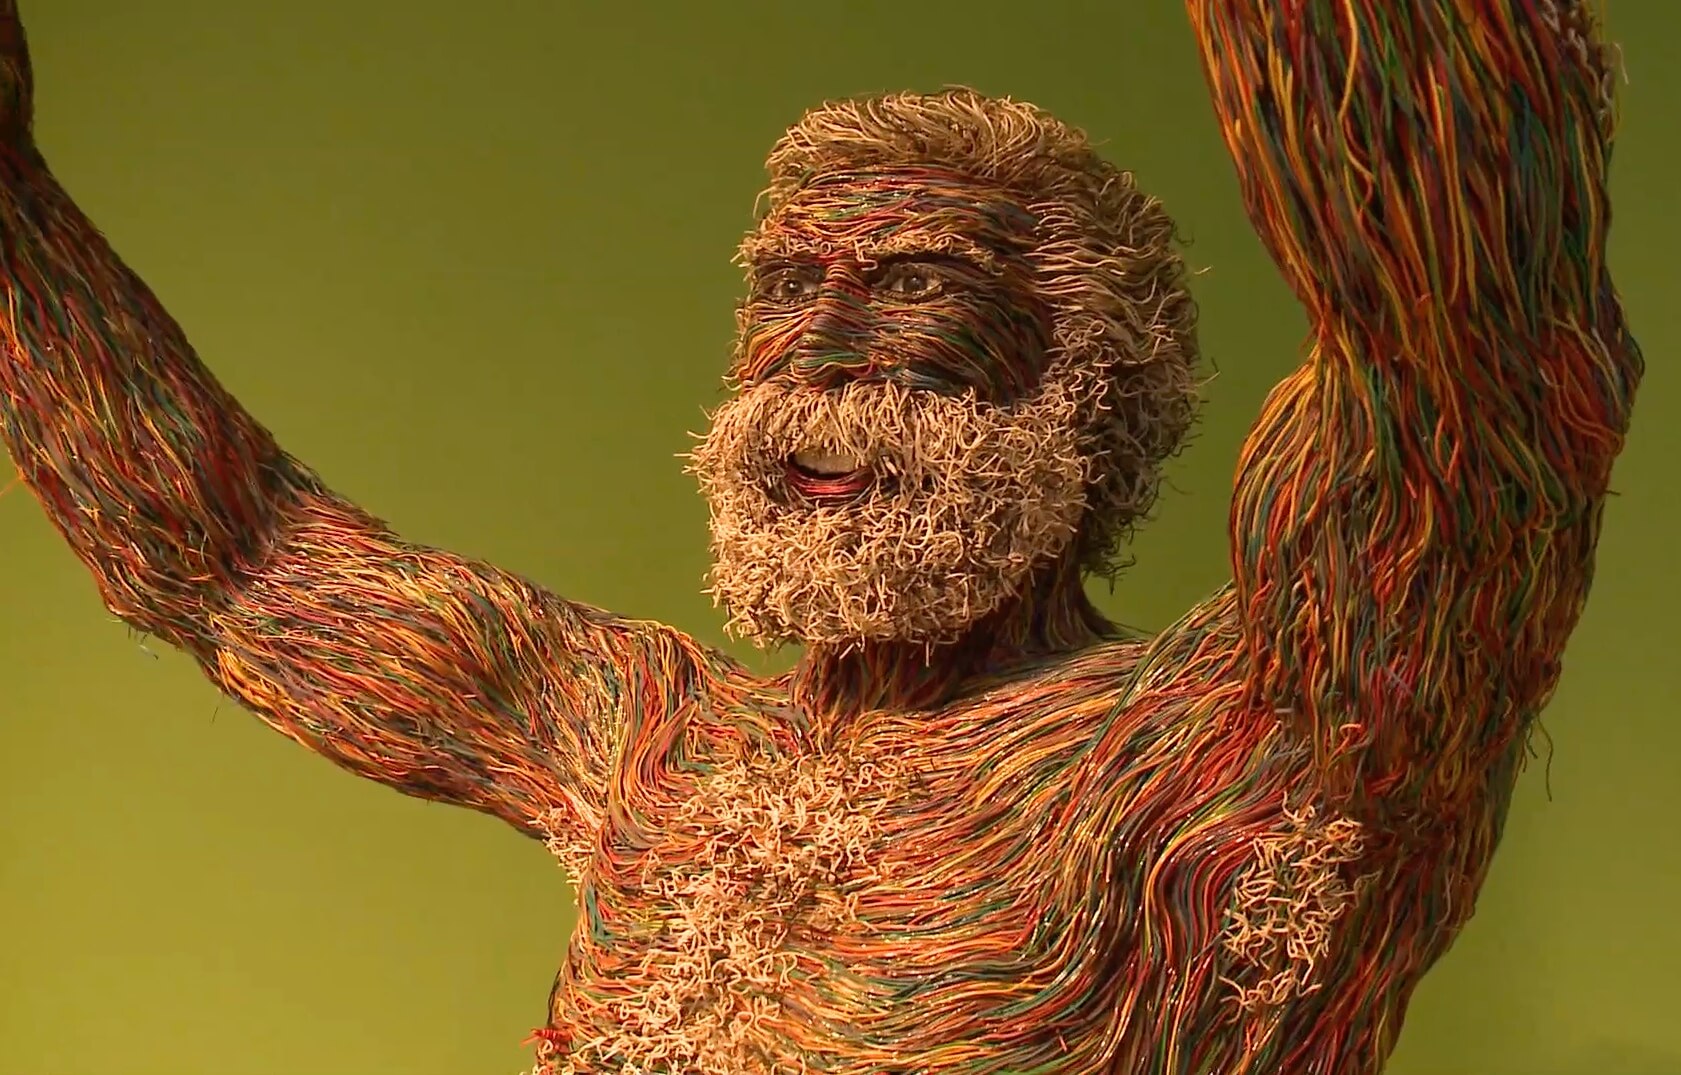 A naturalistic sculpture of a bearded old man with his arms raised and smiling,
                composed entirely out of red, green and yellow wires, except for his white-wired beard and hair.